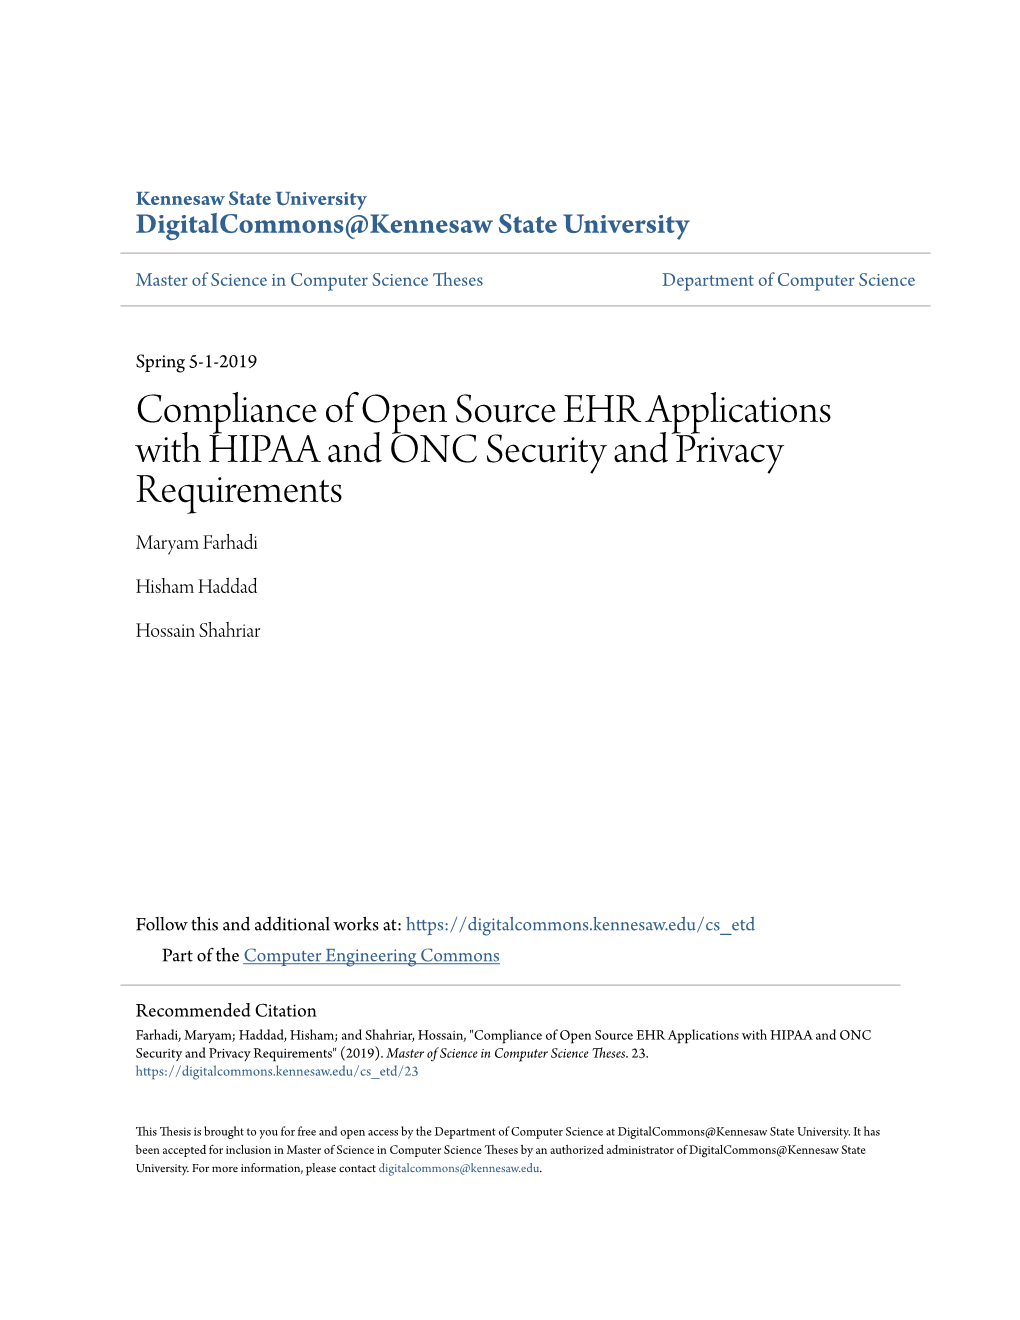 Compliance of Open Source EHR Applications with HIPAA and ONC Security and Privacy Requirements Maryam Farhadi